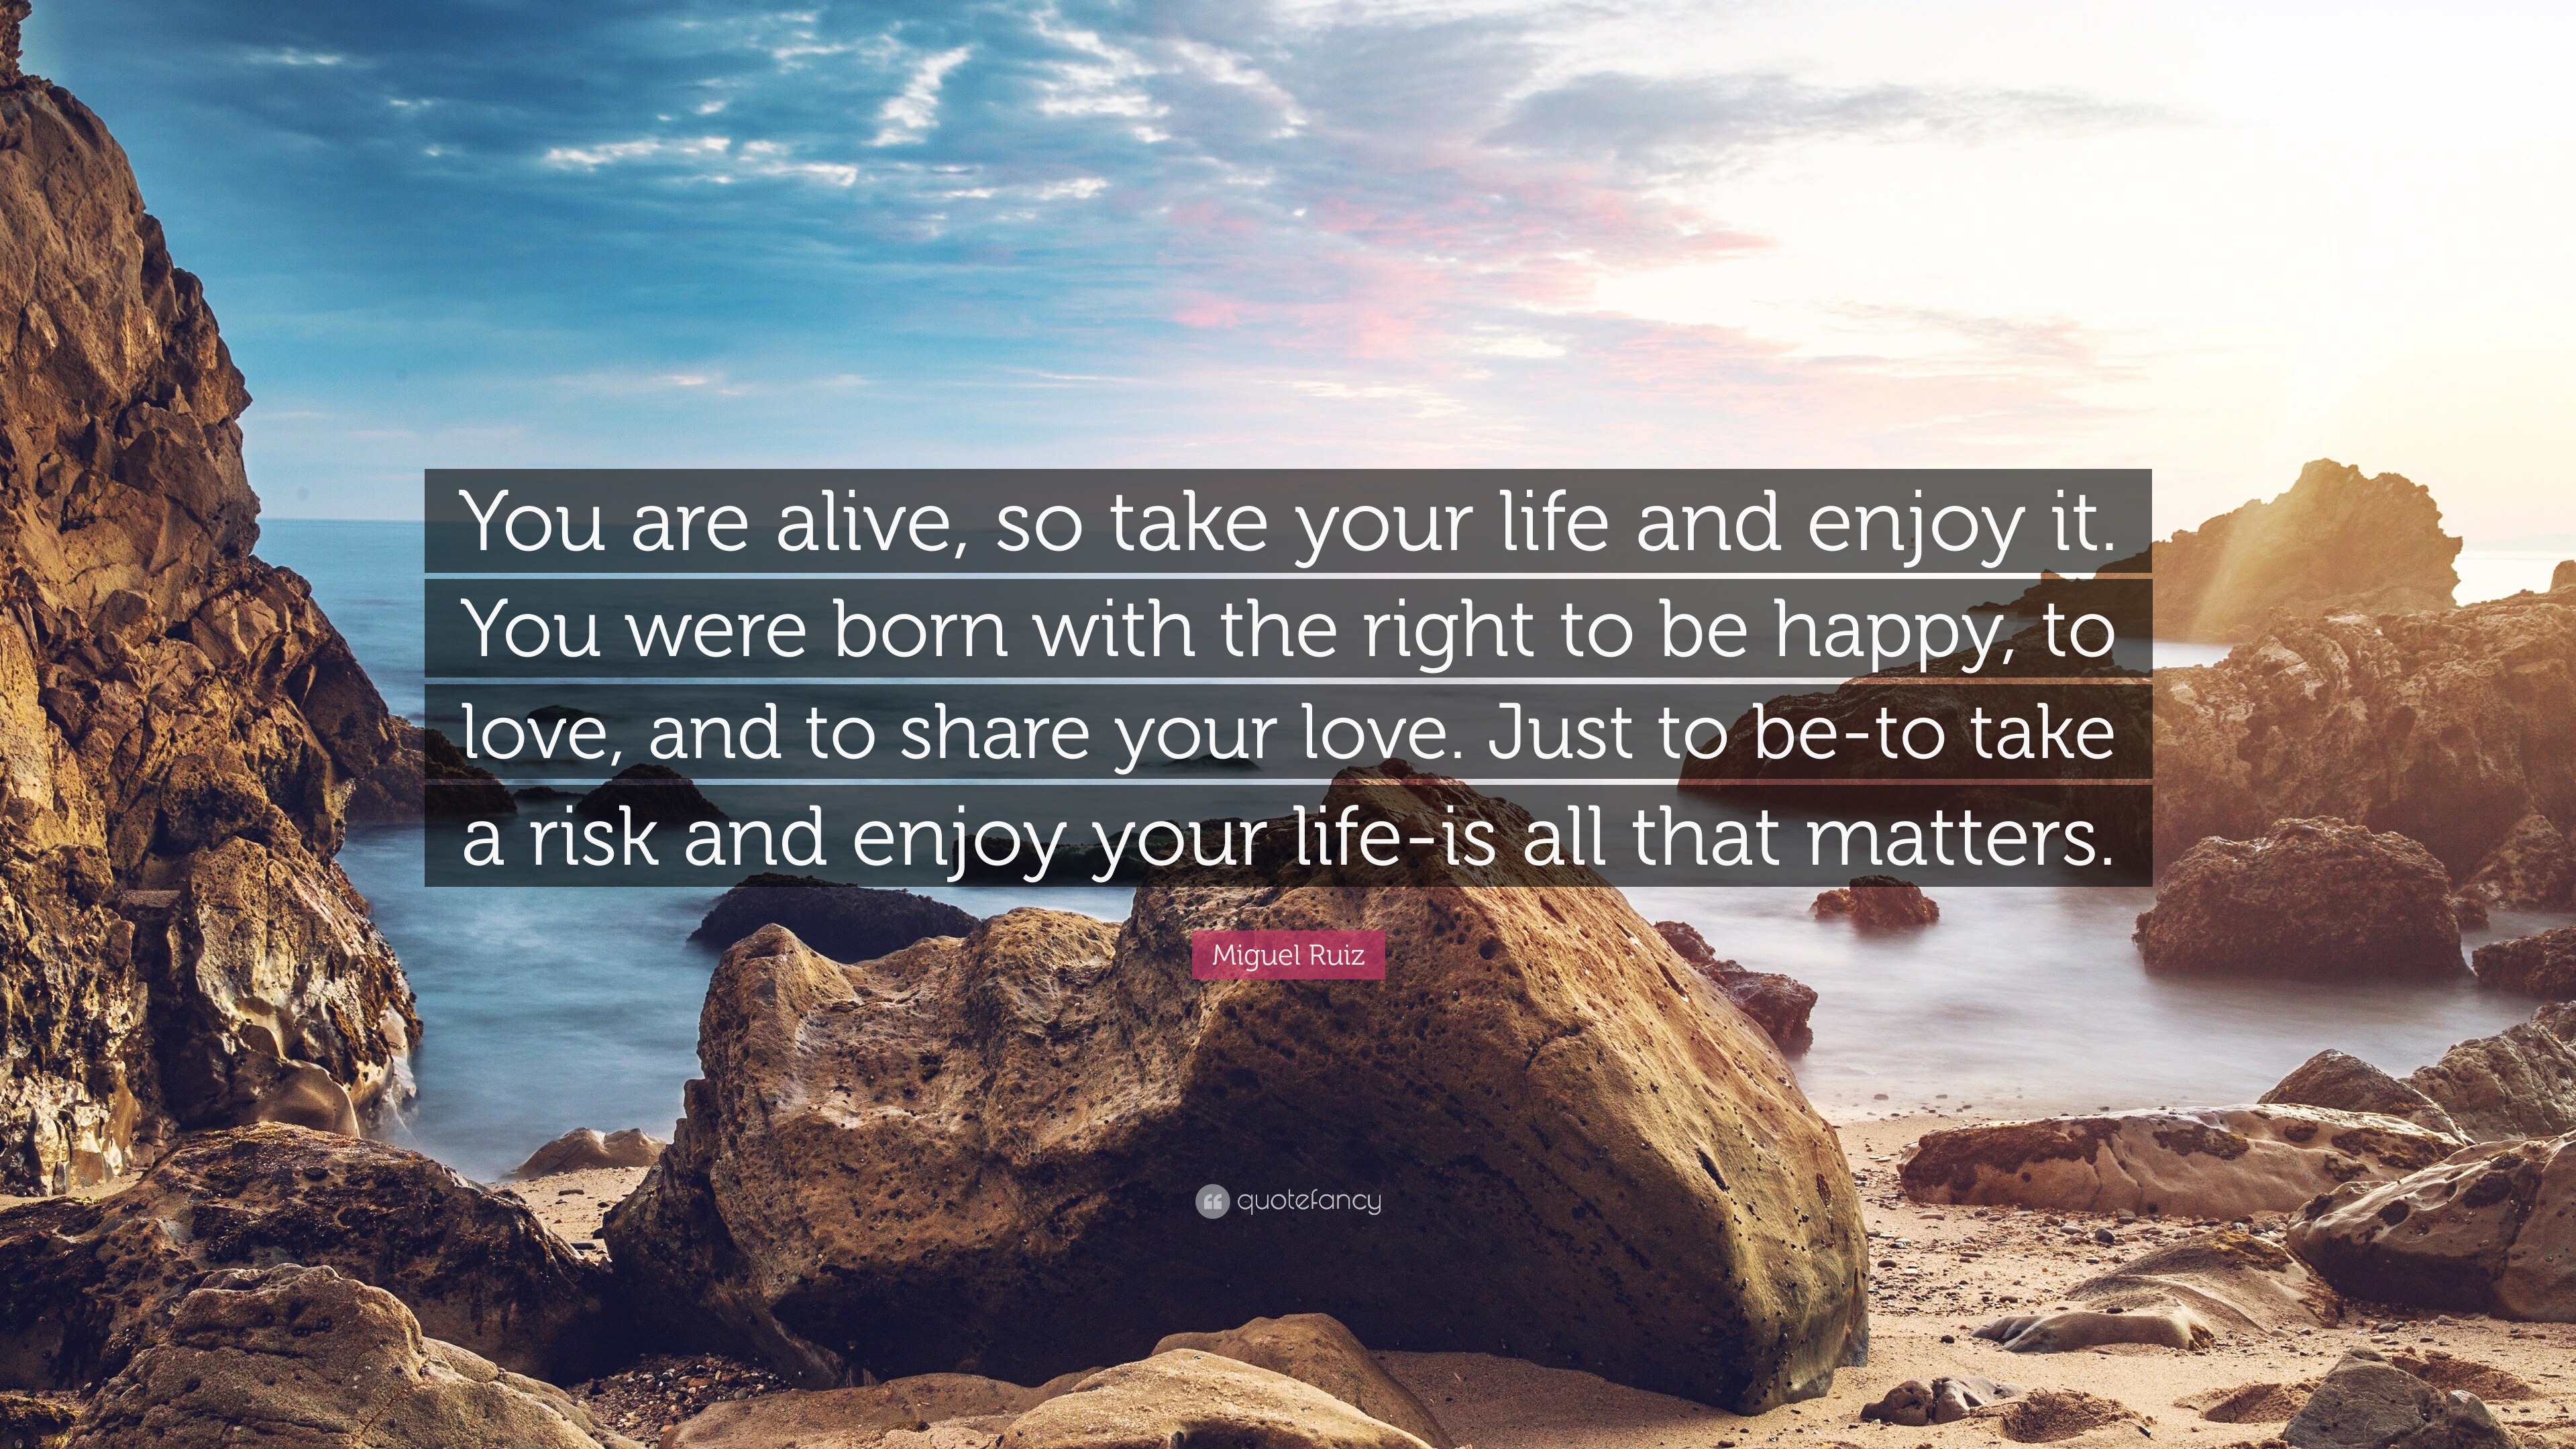 Miguel Ruiz Quote “You are alive so take your life and enjoy it